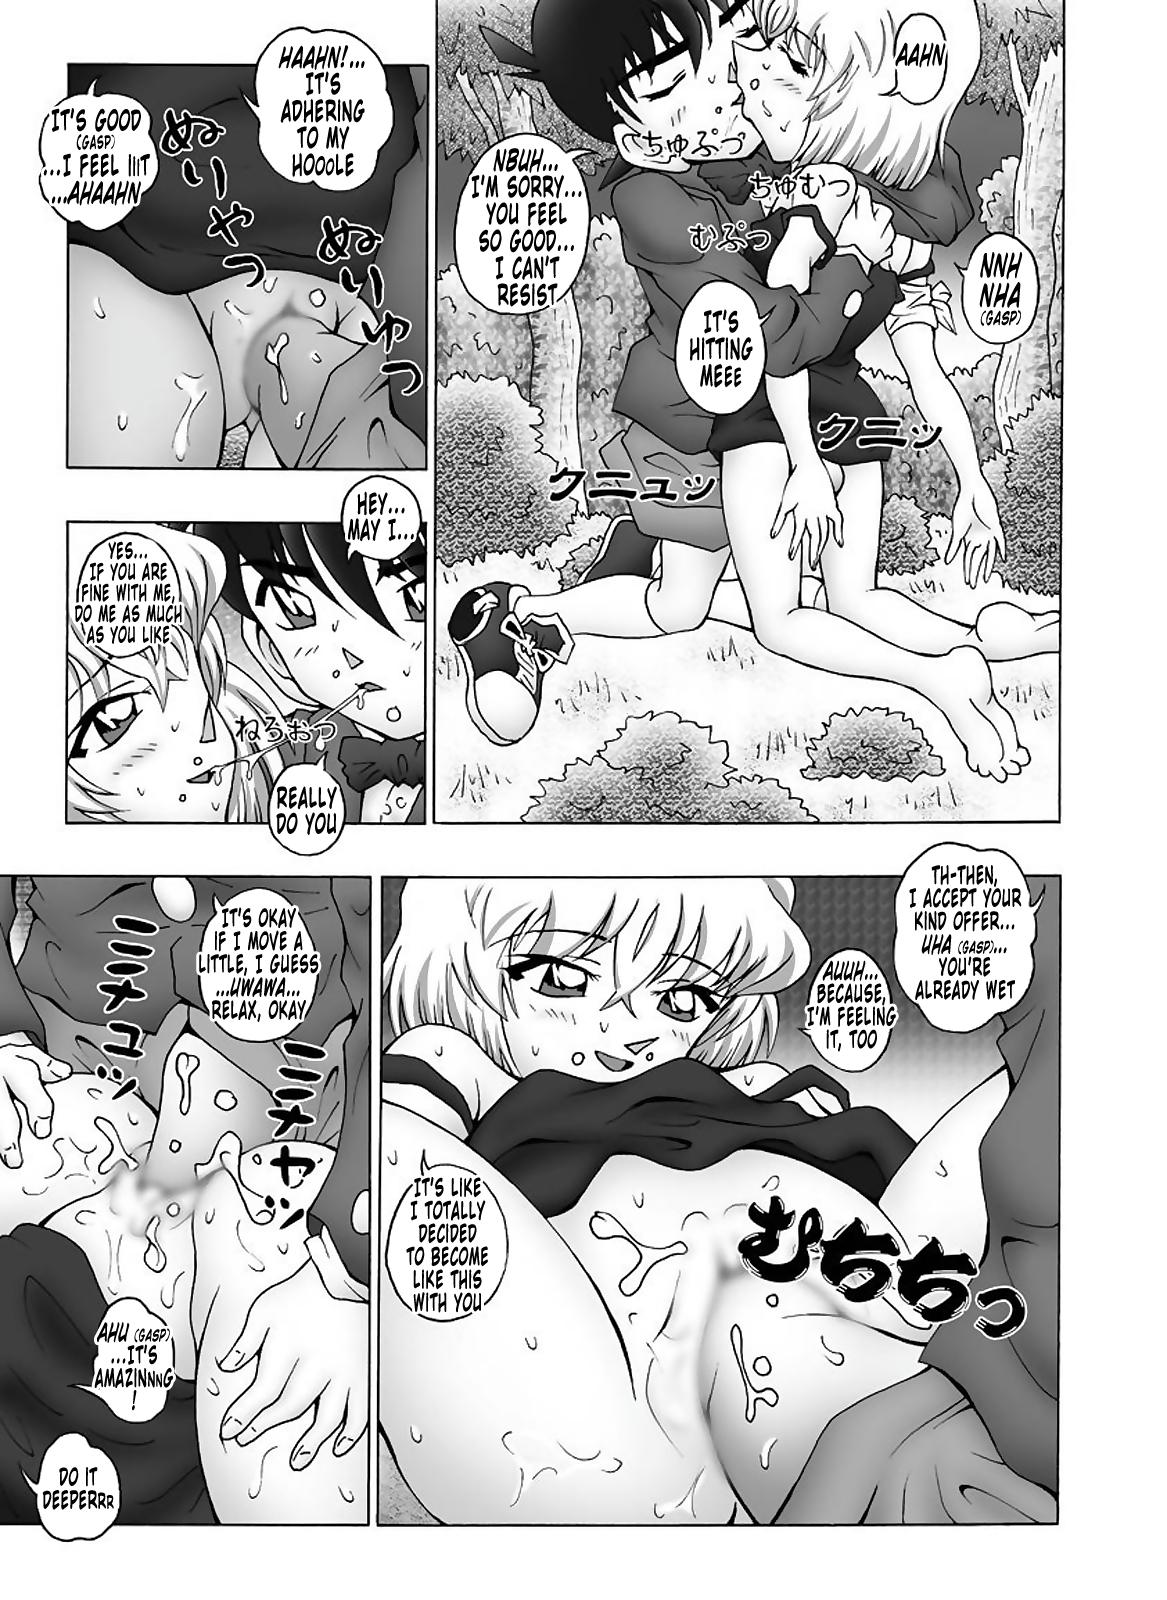 Solo Bumbling Detective Conan - File 12: The Case of Back To The Future - Detective conan Flogging - Page 12